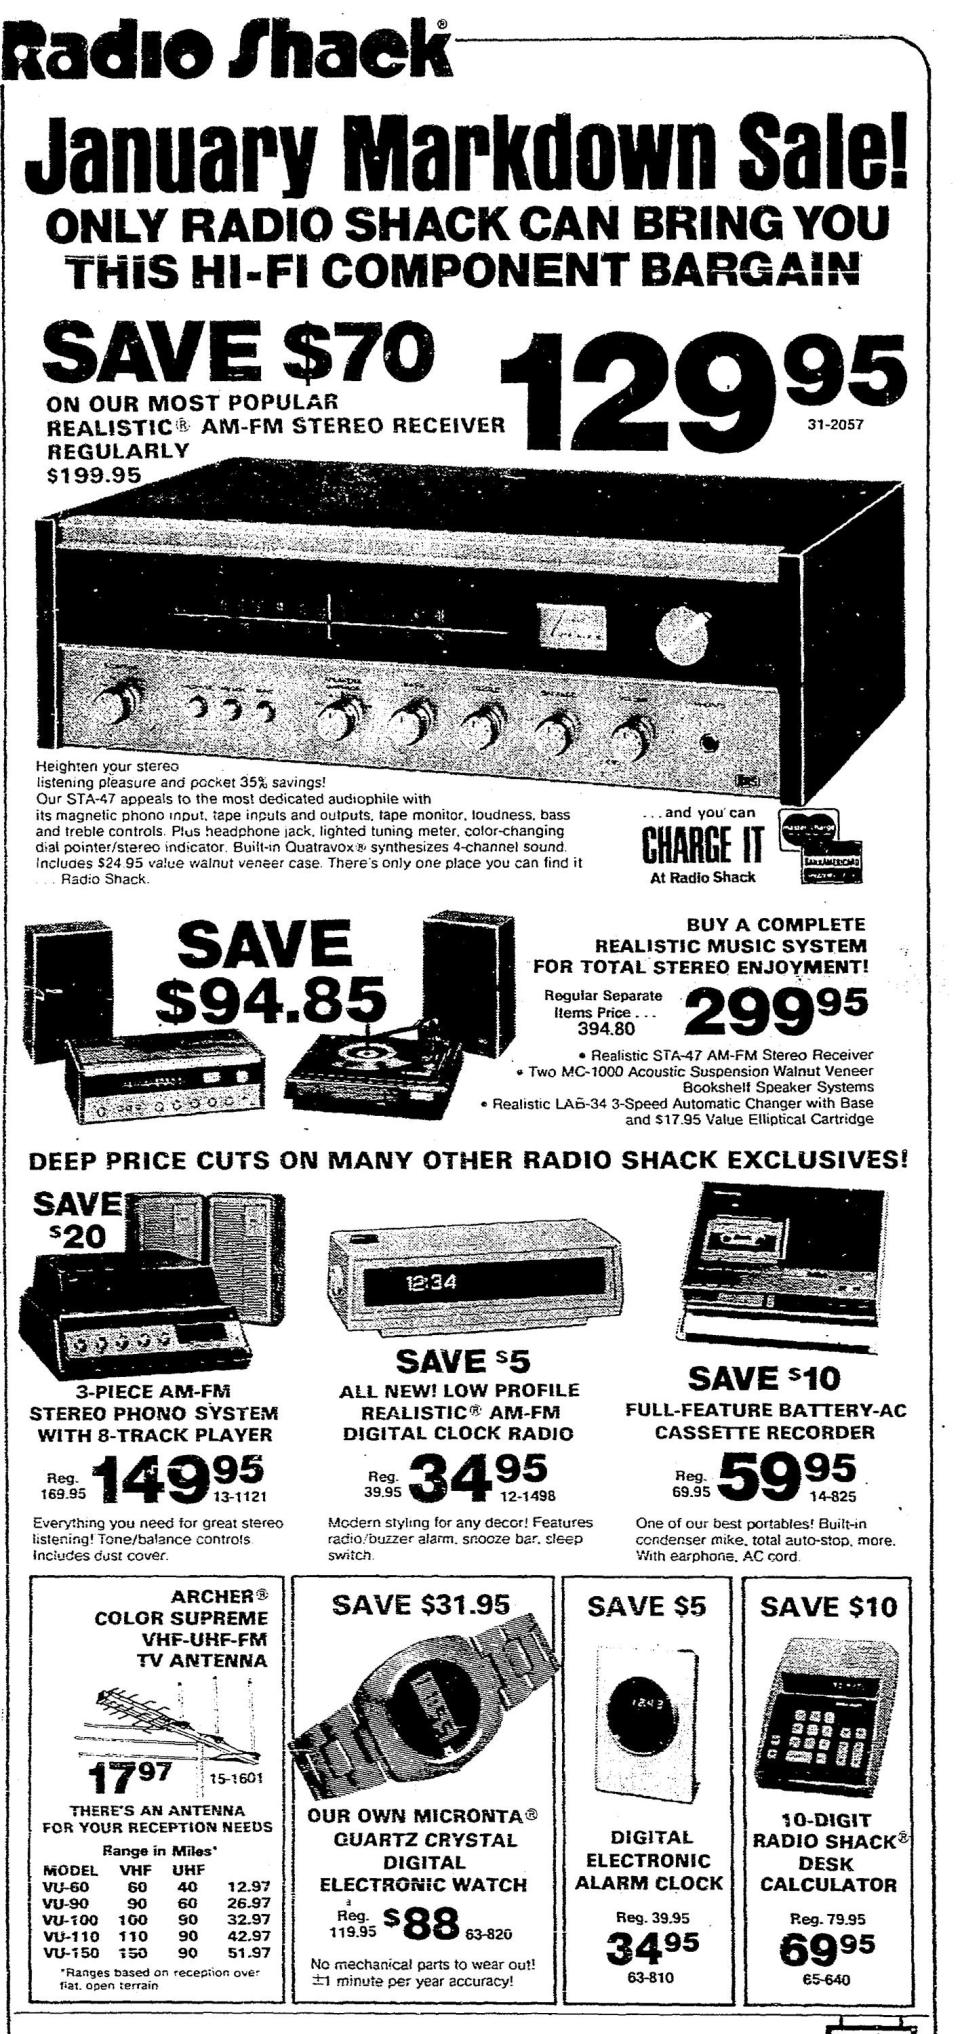 On Jan. 23, 1975, a Radio Shack advertised in the Erie Daily Times various deals including a Micronta quartz crystal digital electronic watch that was accurate to "+/- 1 minute per year." The watch was on sale that day for $88, which would be about $460 in 2022 dollars. At the time, Radio Shack had locations at the Eastway Plaza in Harborcreek Township and in the KMart Plaza, then called Plaza 79, at 2419 W. 26th St. The retailer, which once operated more than 5,000 outlets nationwide, closed more than 1,700 stores in 2015 after filing for bankruptcy, including four Erie County locations and one in Meadville. The KMart Plaza store remained in operation the longest, closing sometime after March 2017.